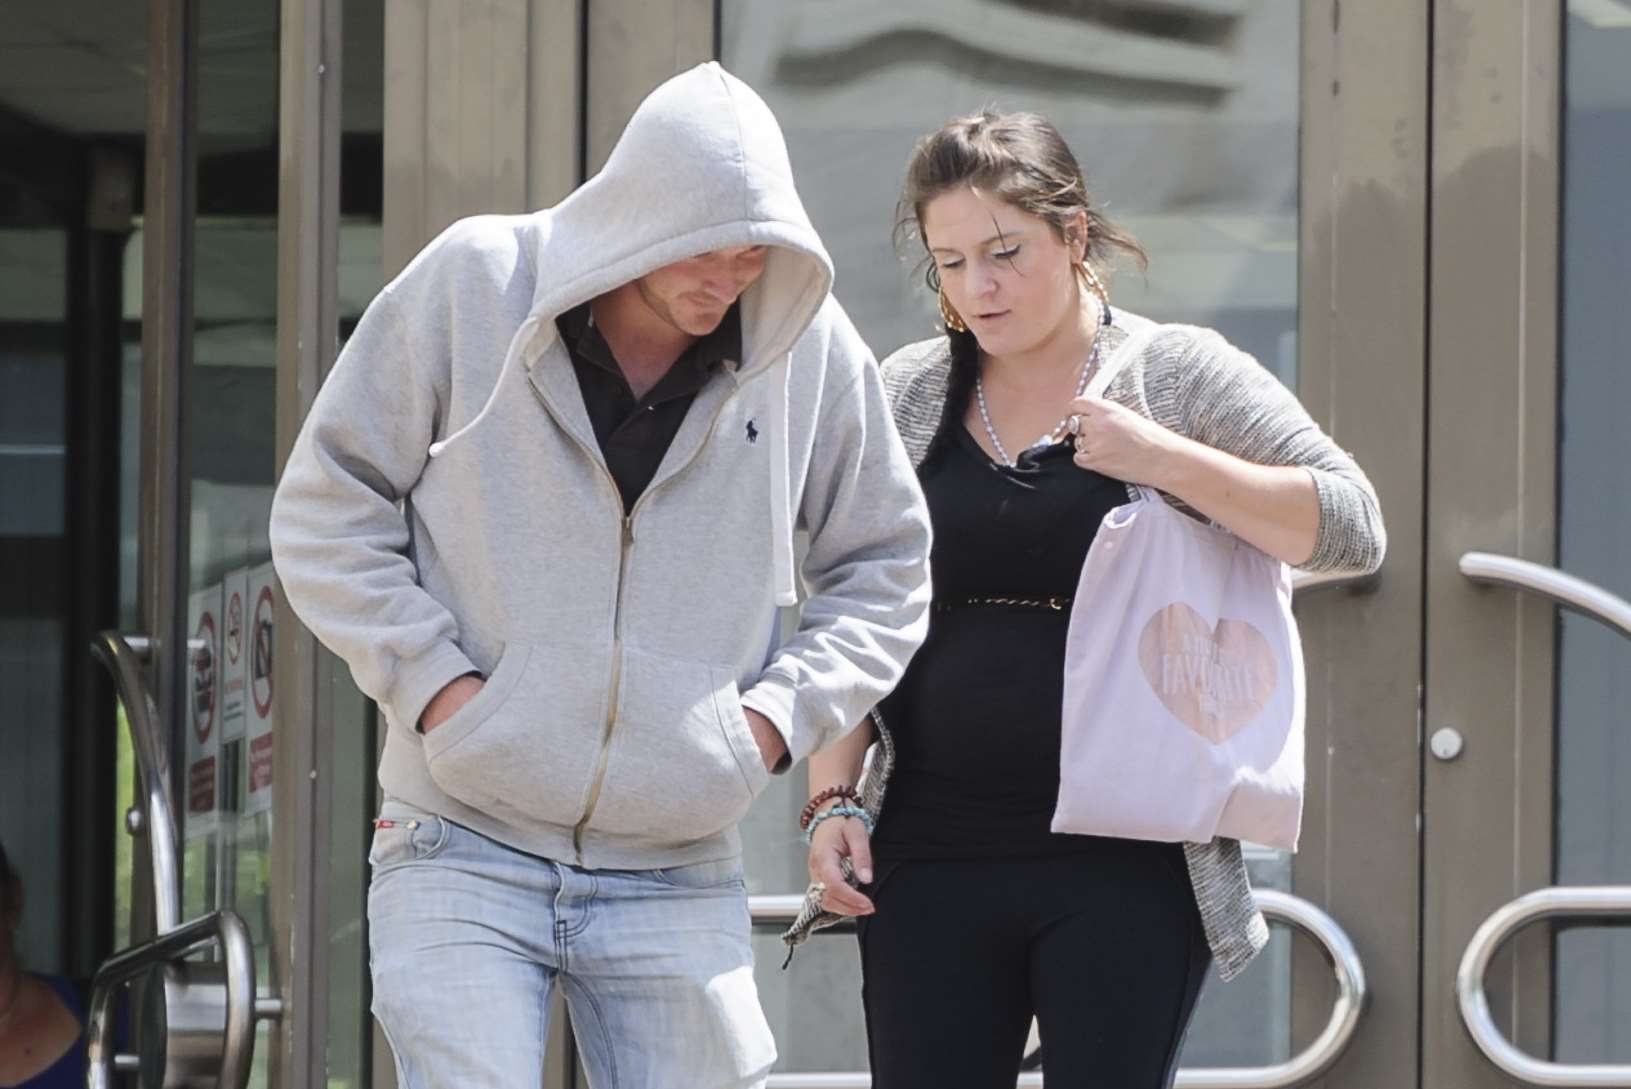 Danny Shepherd and Katherine Cox outside Maidstone Crown Court. Picture: Andy Payton.